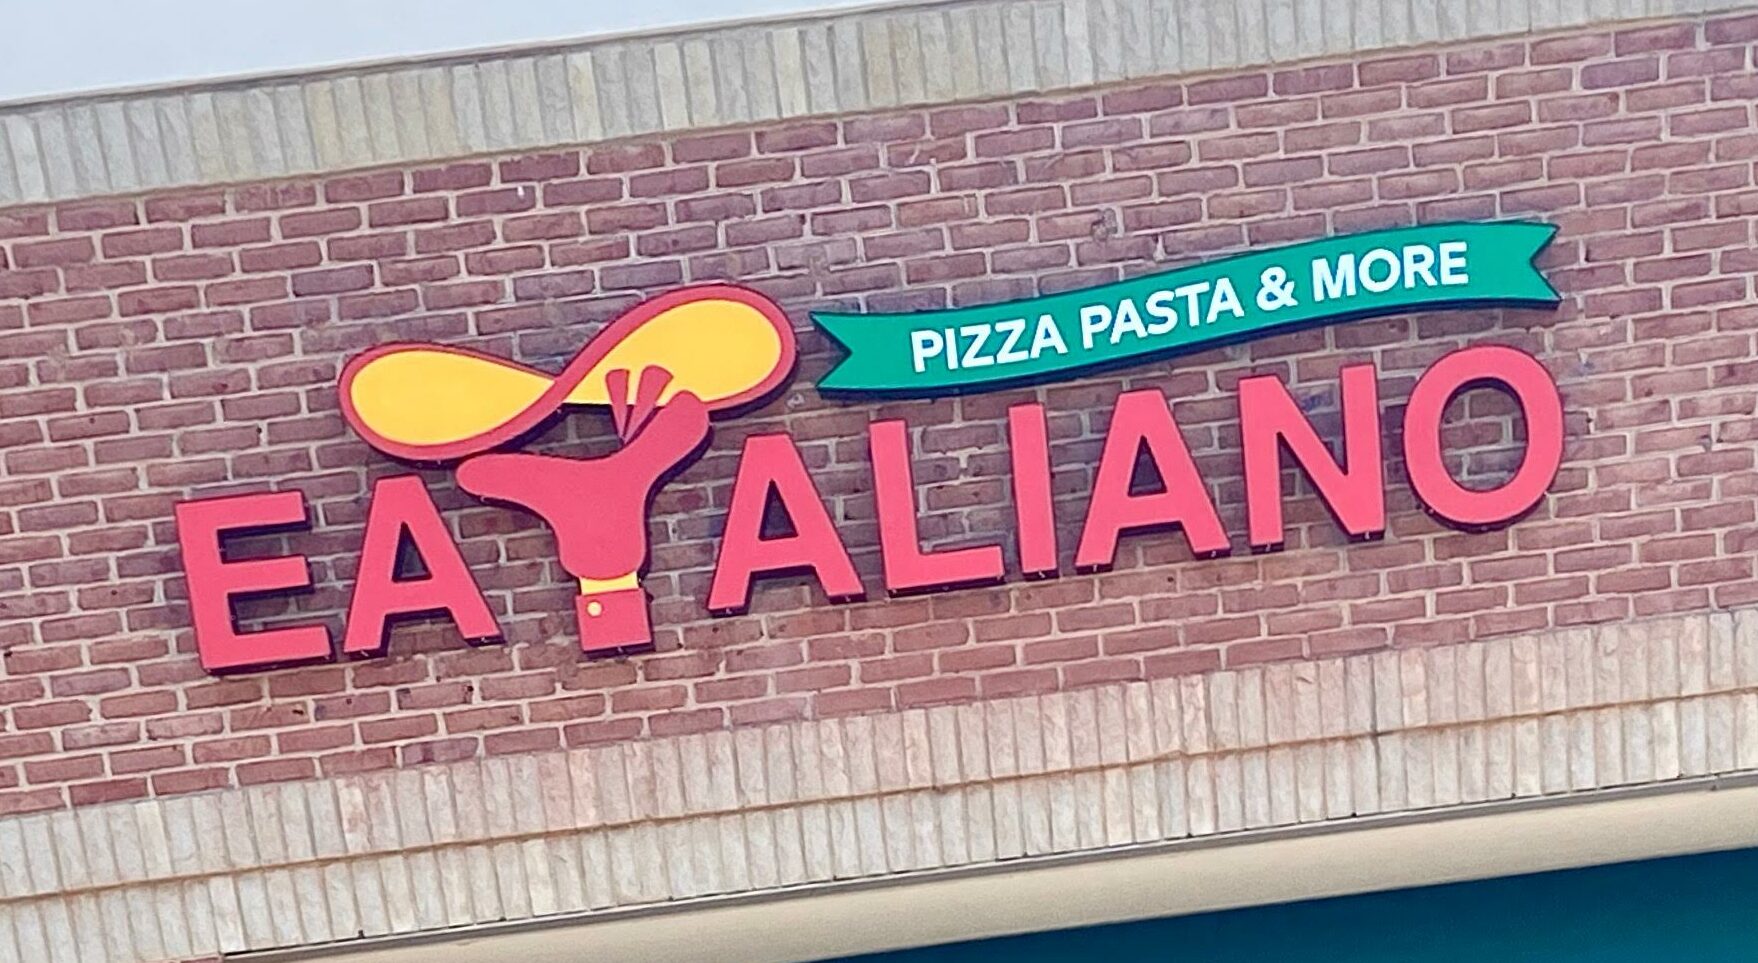 Italian Takeout, Pizza, Pasta, and more